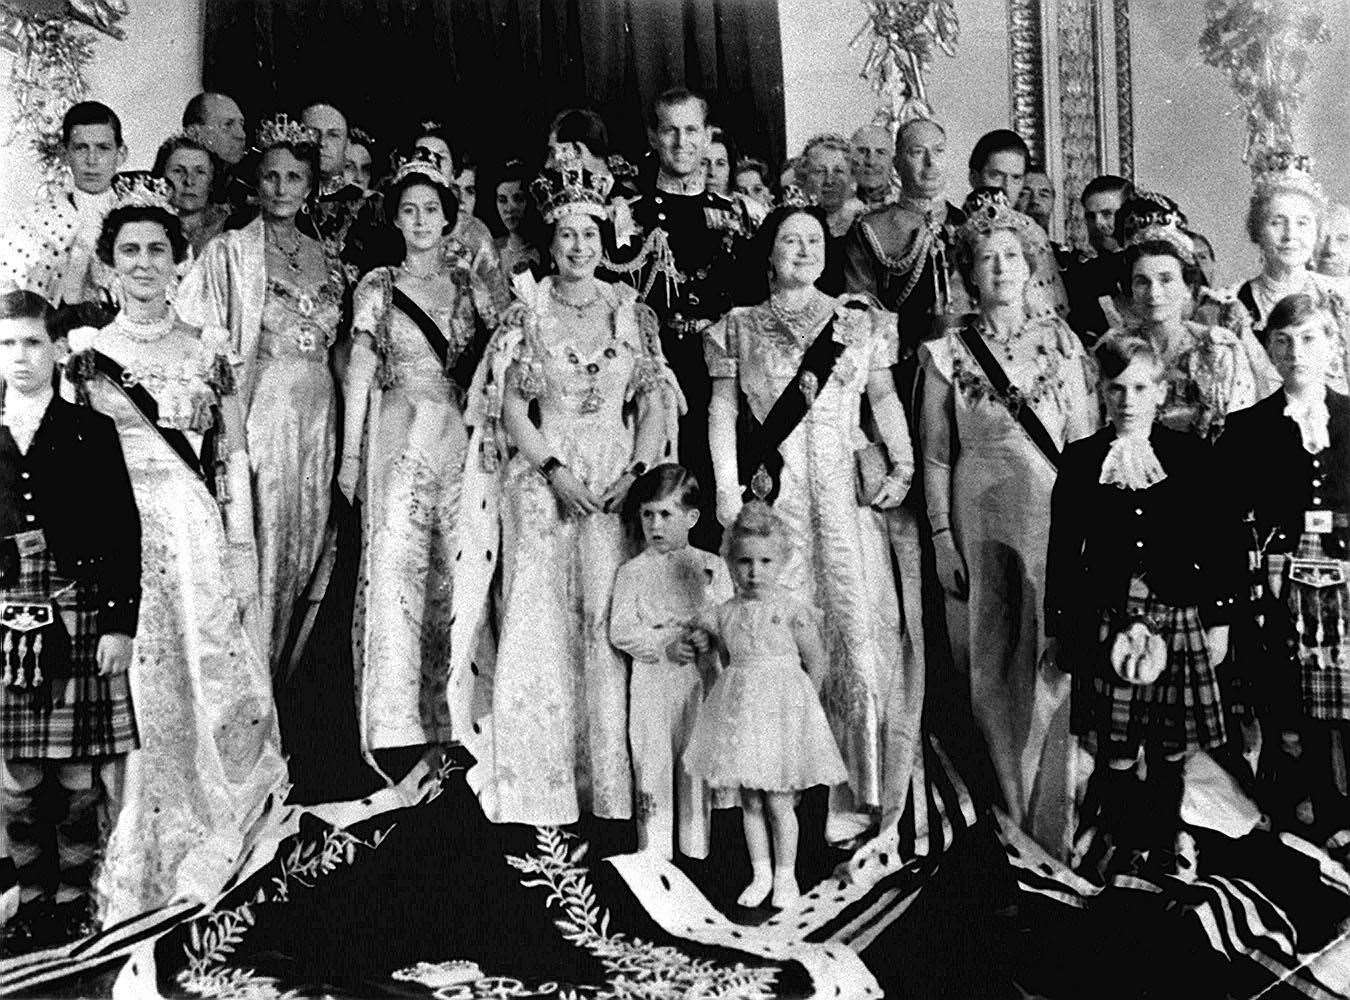 Queen Elizabeth II, the Duke of Edinburgh, Prince Charles, Princess Anne and family and guests pose at Buckingham Palace after the coronation (PA)